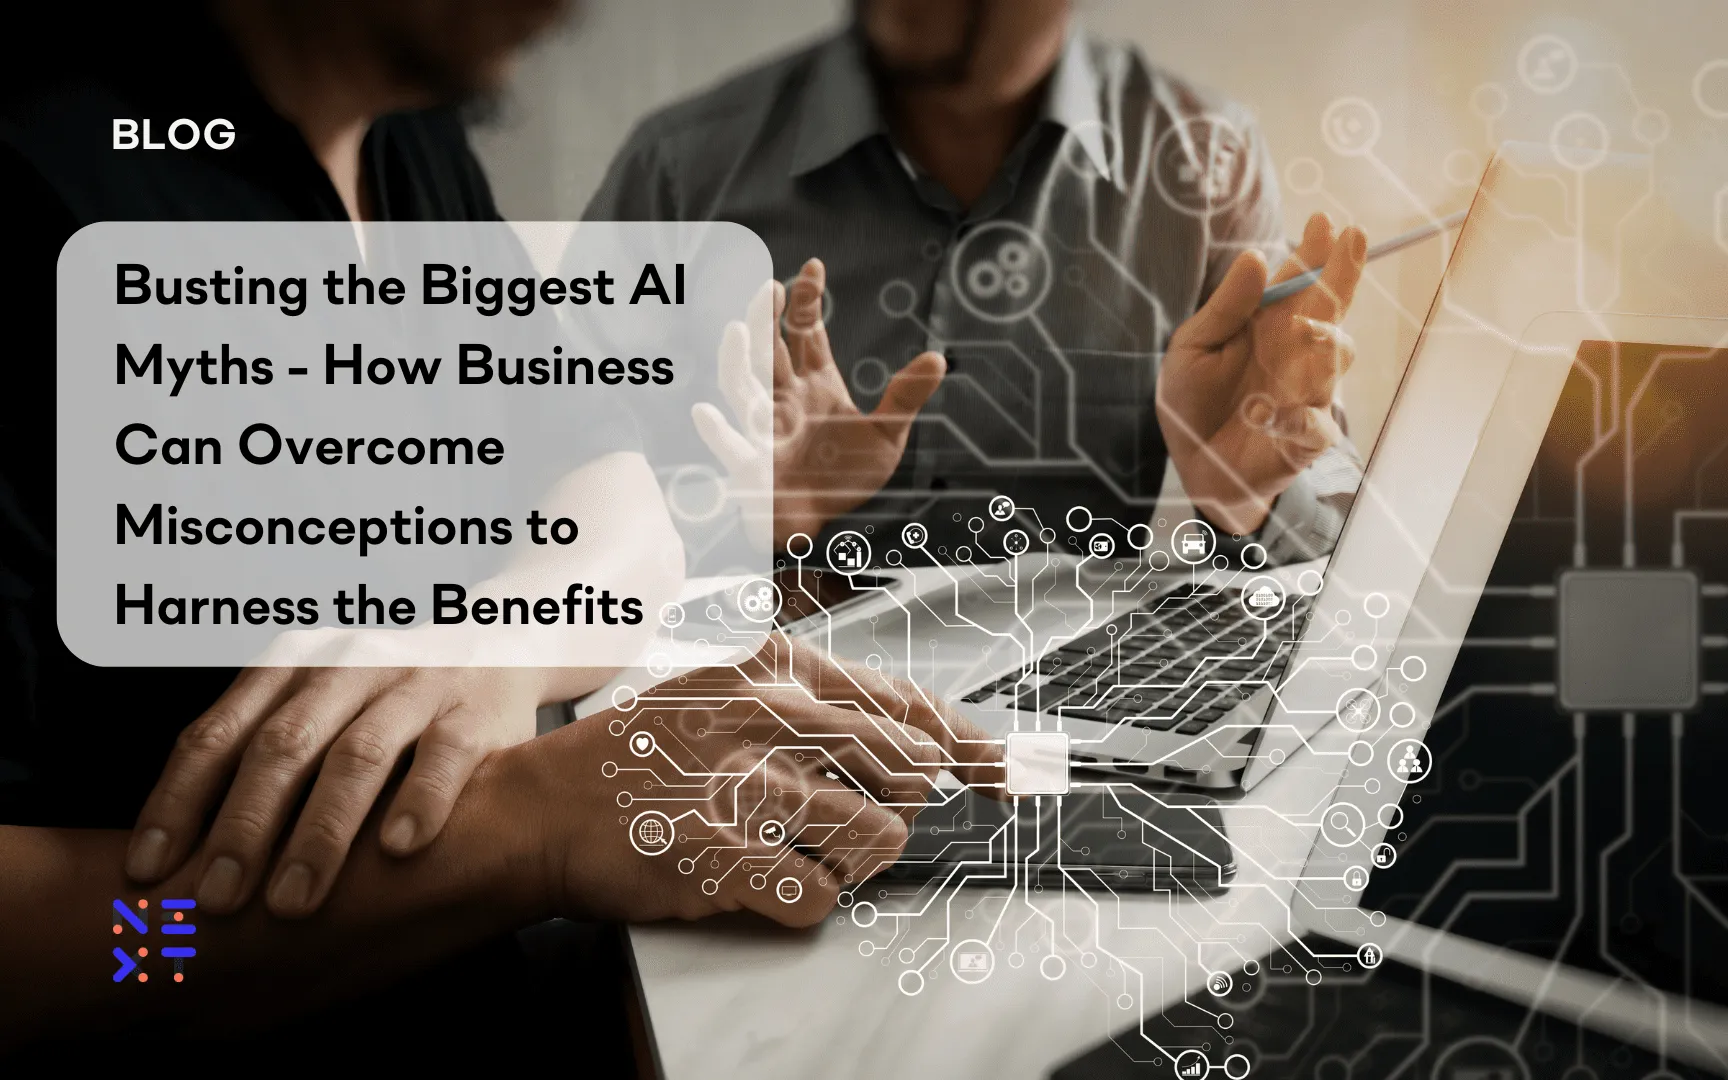 Busting the Biggest AI Myths – How Businesses Can Overcome Misconceptions to Harness the Benefits